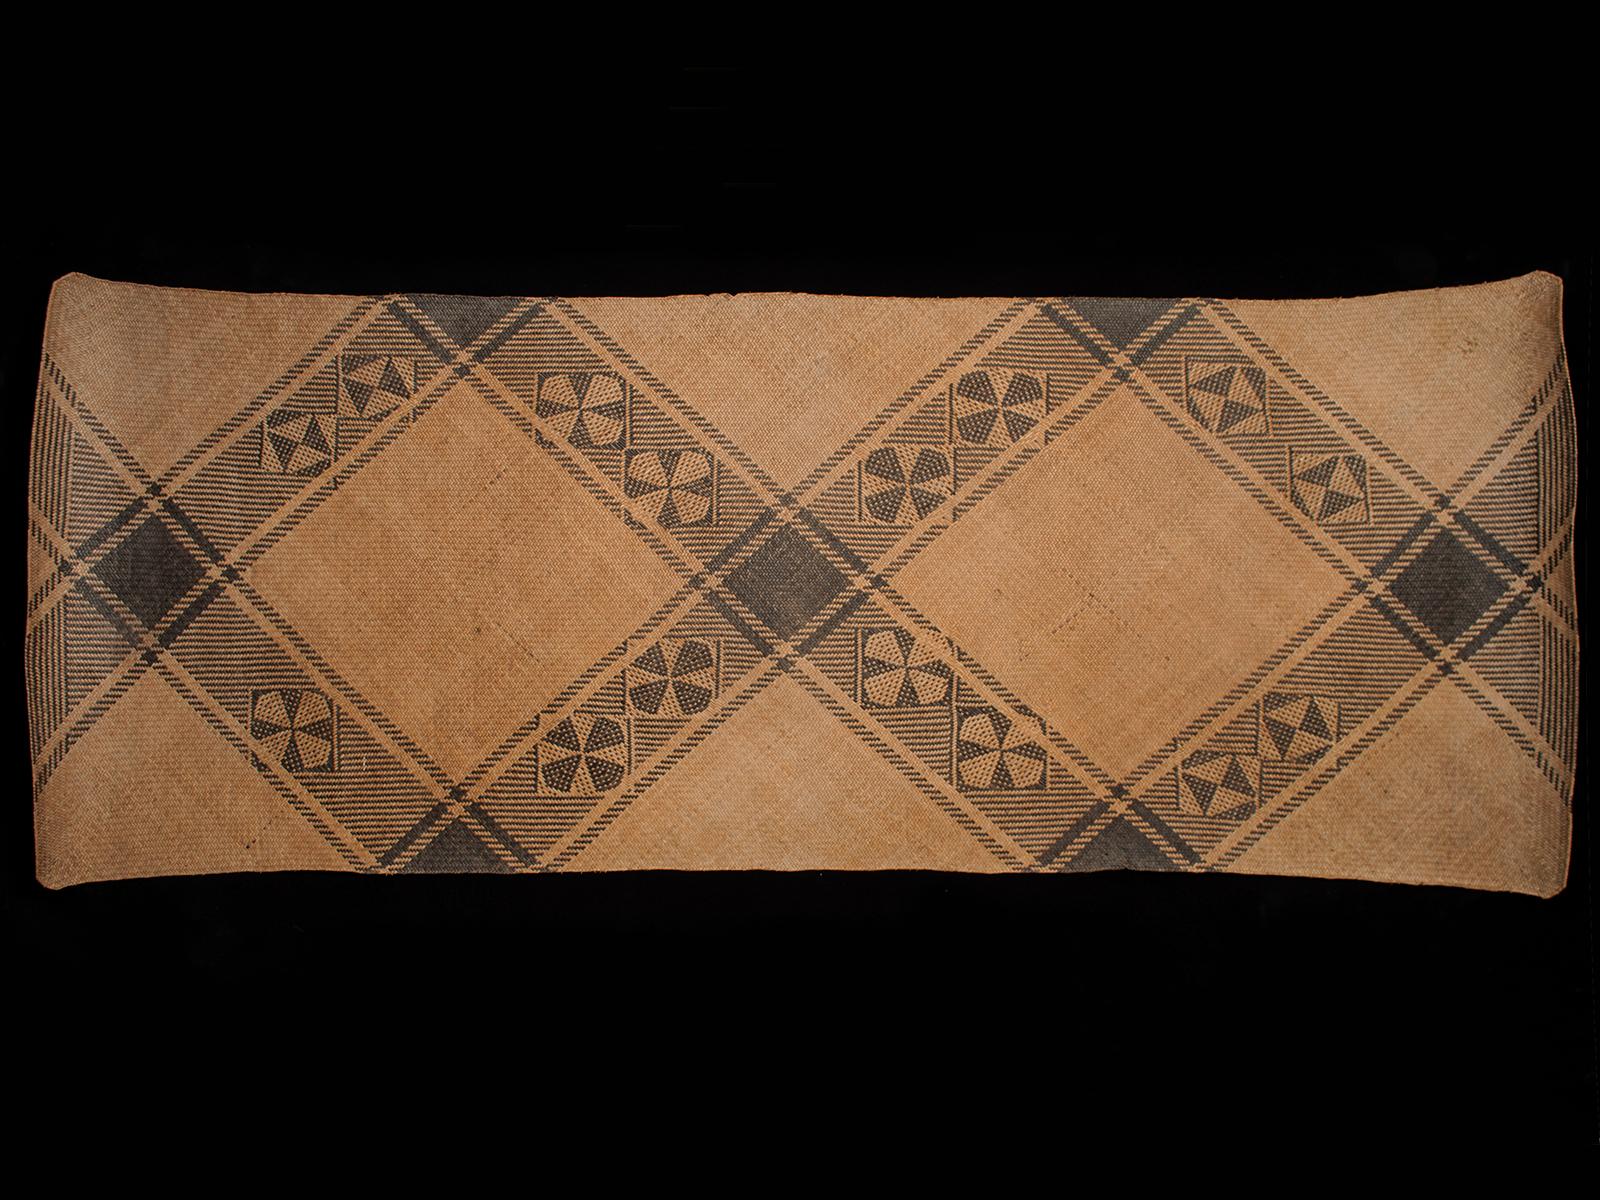 Mid-20th century Tribal sleeping mat, dayak, Punan people, Kalimantan, Borneo

A minimally patterned sleeping mat with subtle asymmetry. One small broken area in the upper right corner.



